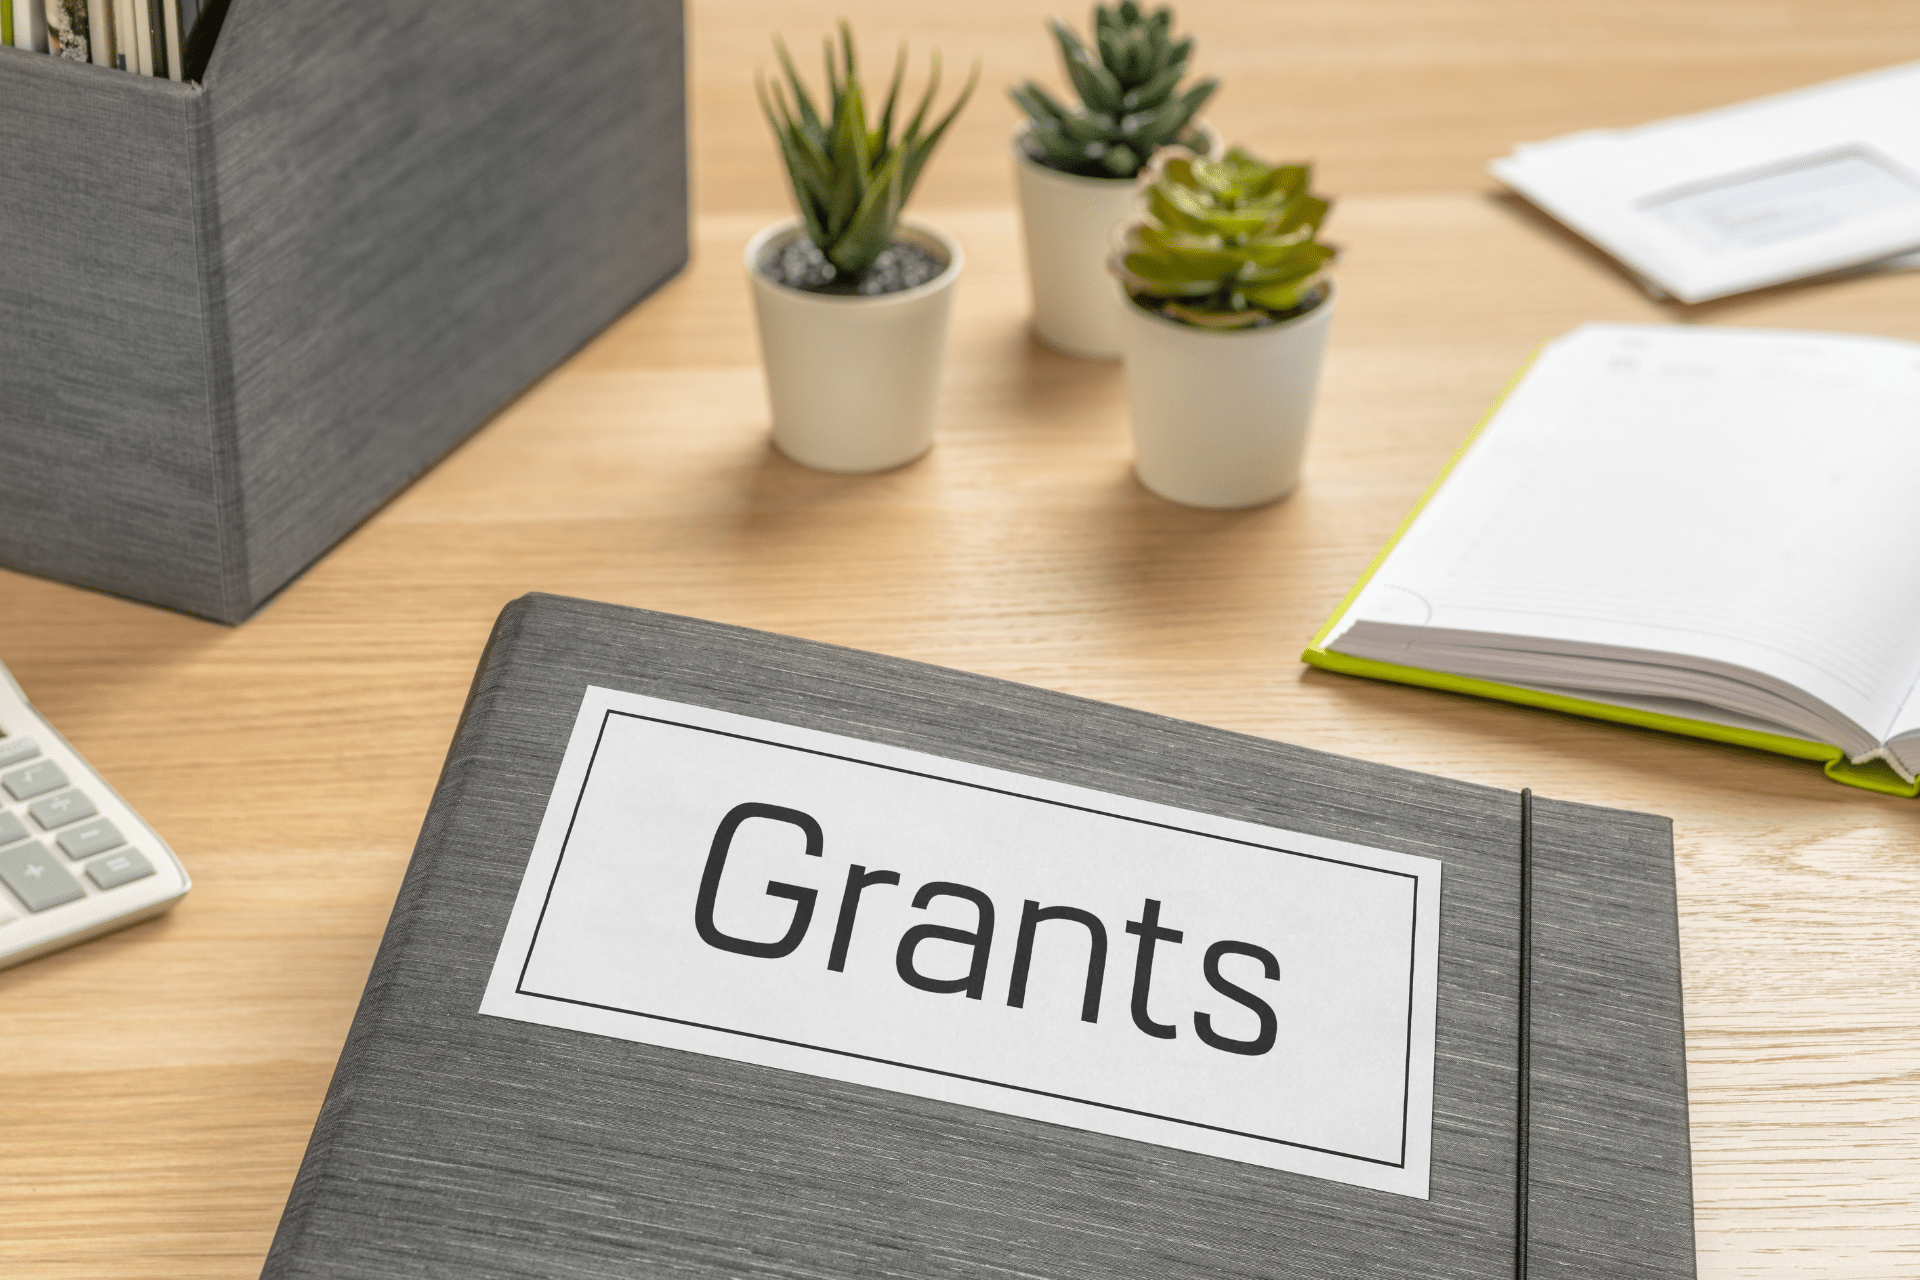 Image used to illustrate grant awards for the Our Awardees Page